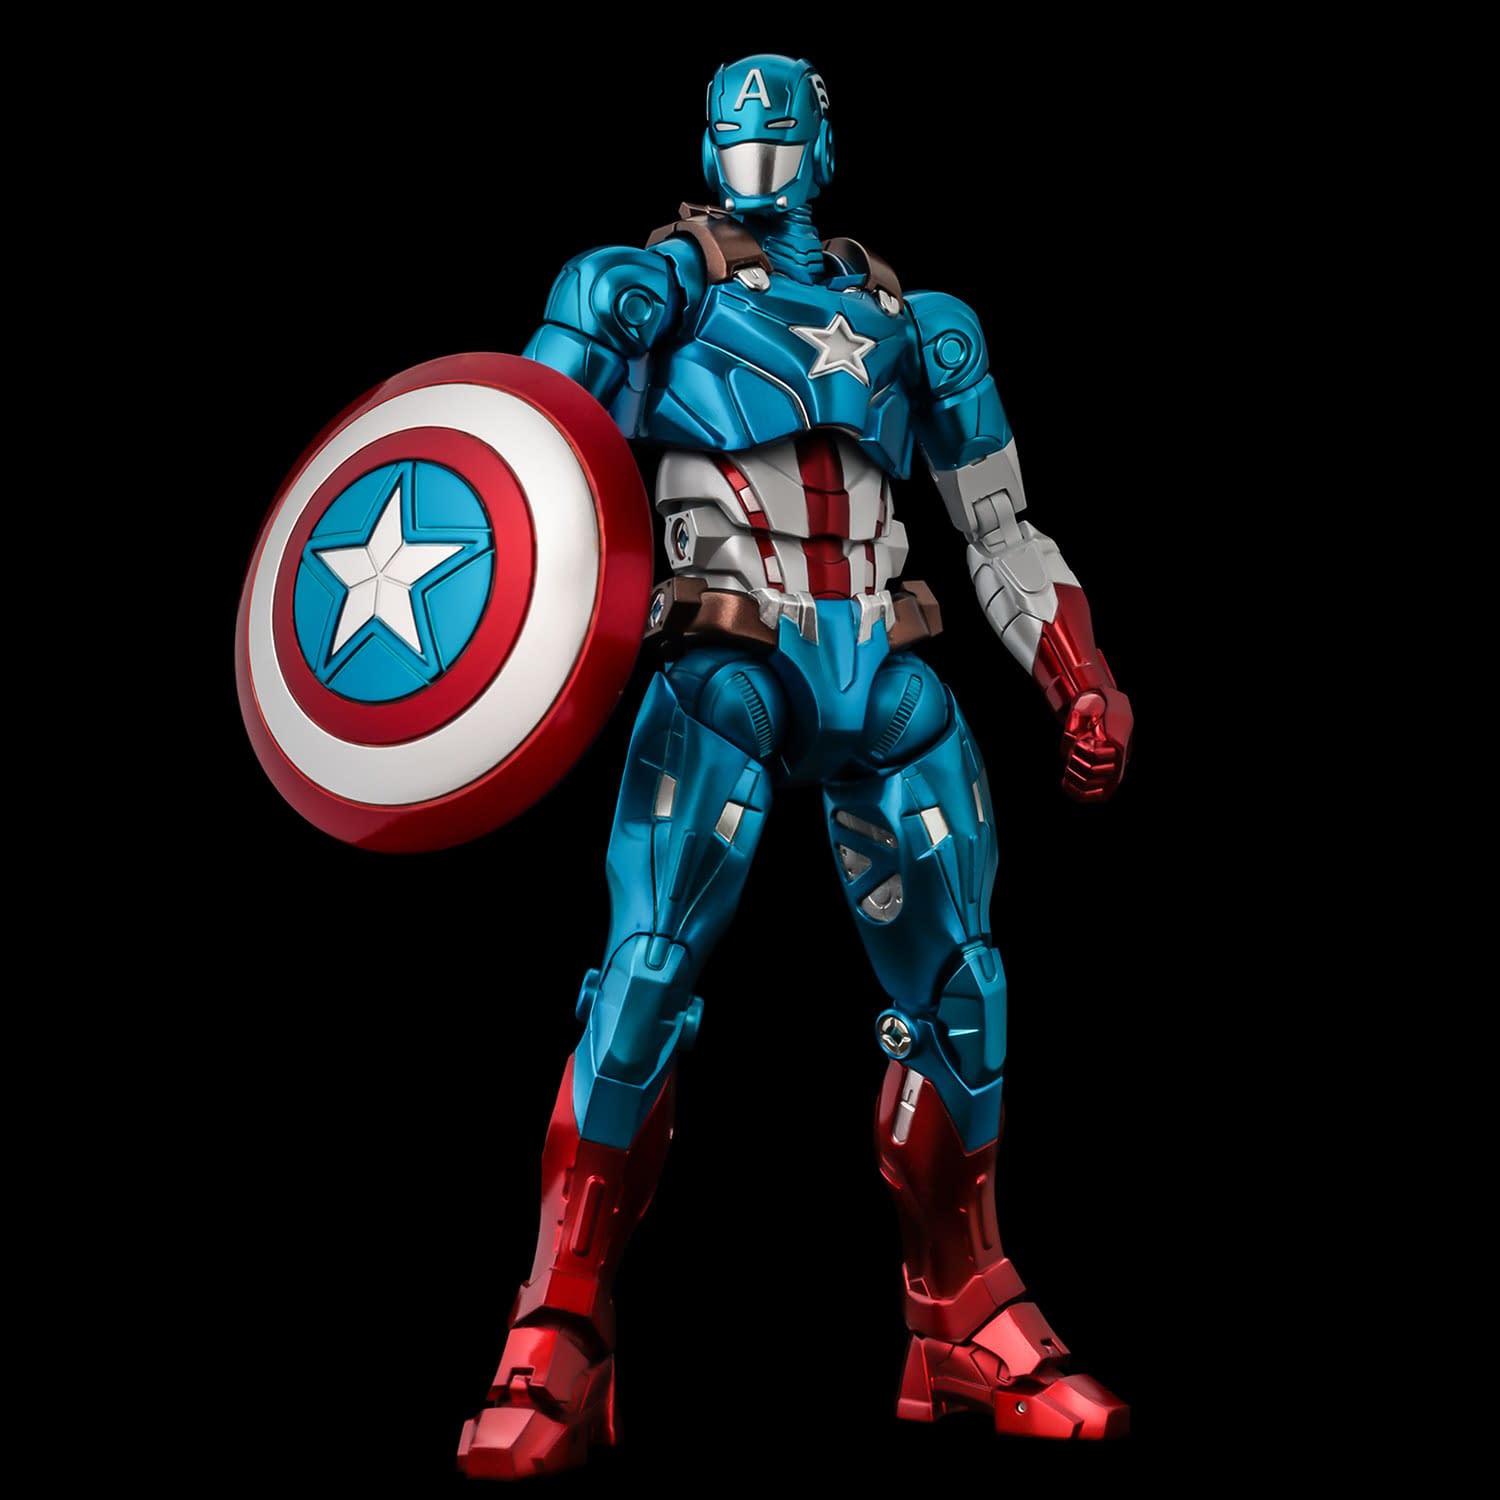 Captain America Gets An Iron Man Upgrade With Sentinel